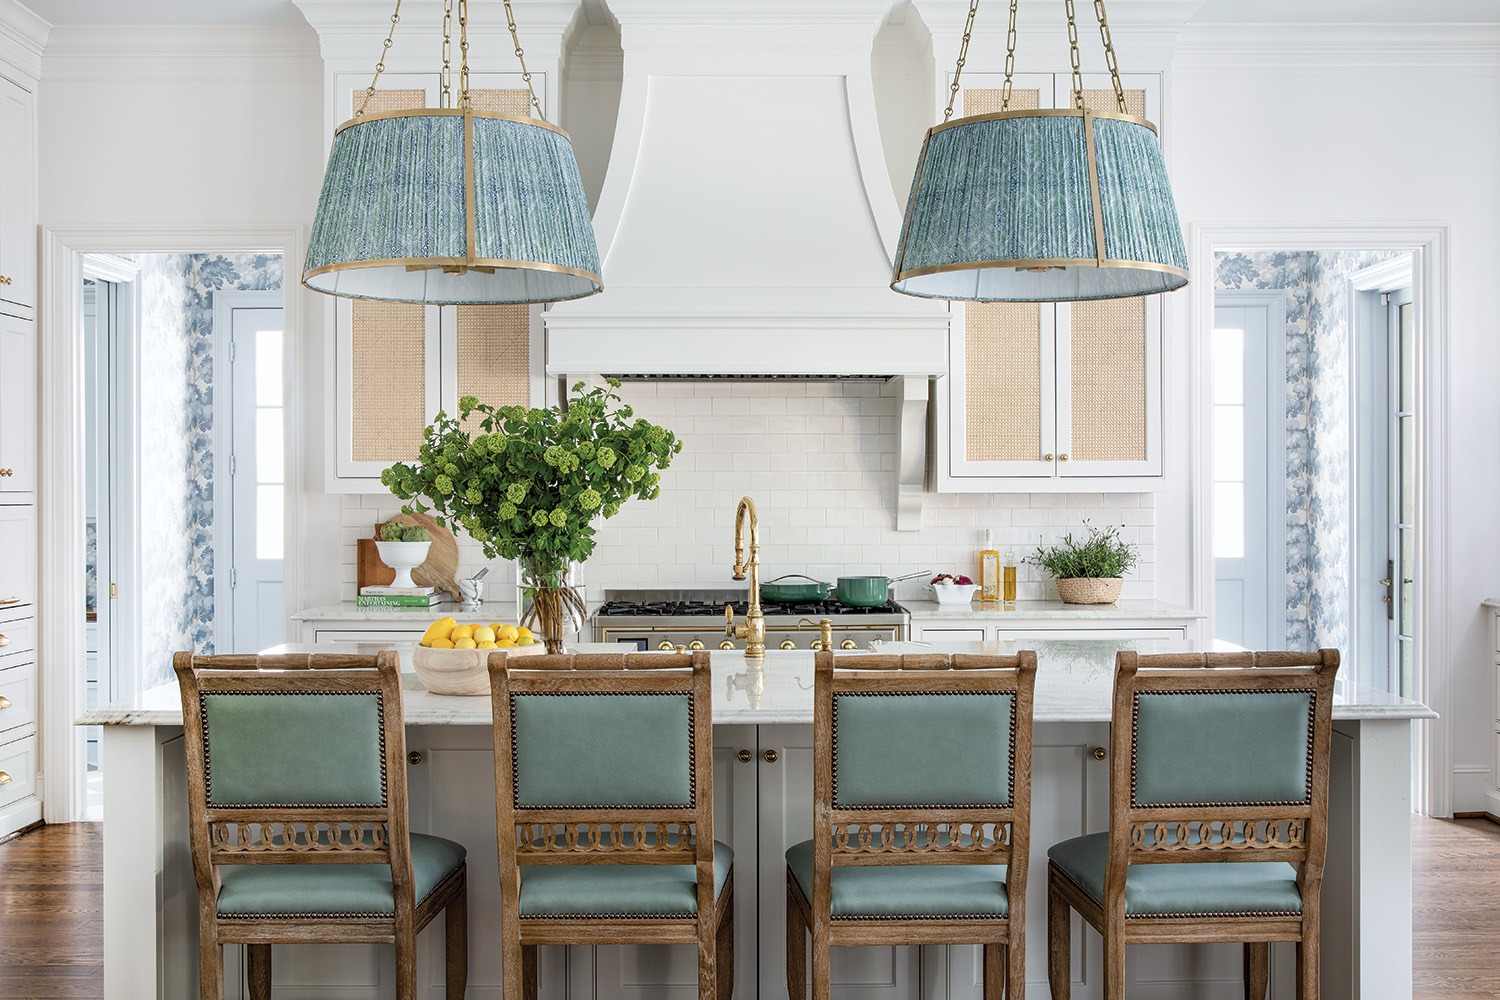 A white kitchen gleams with sea foam bar stools and ceiling lamps.